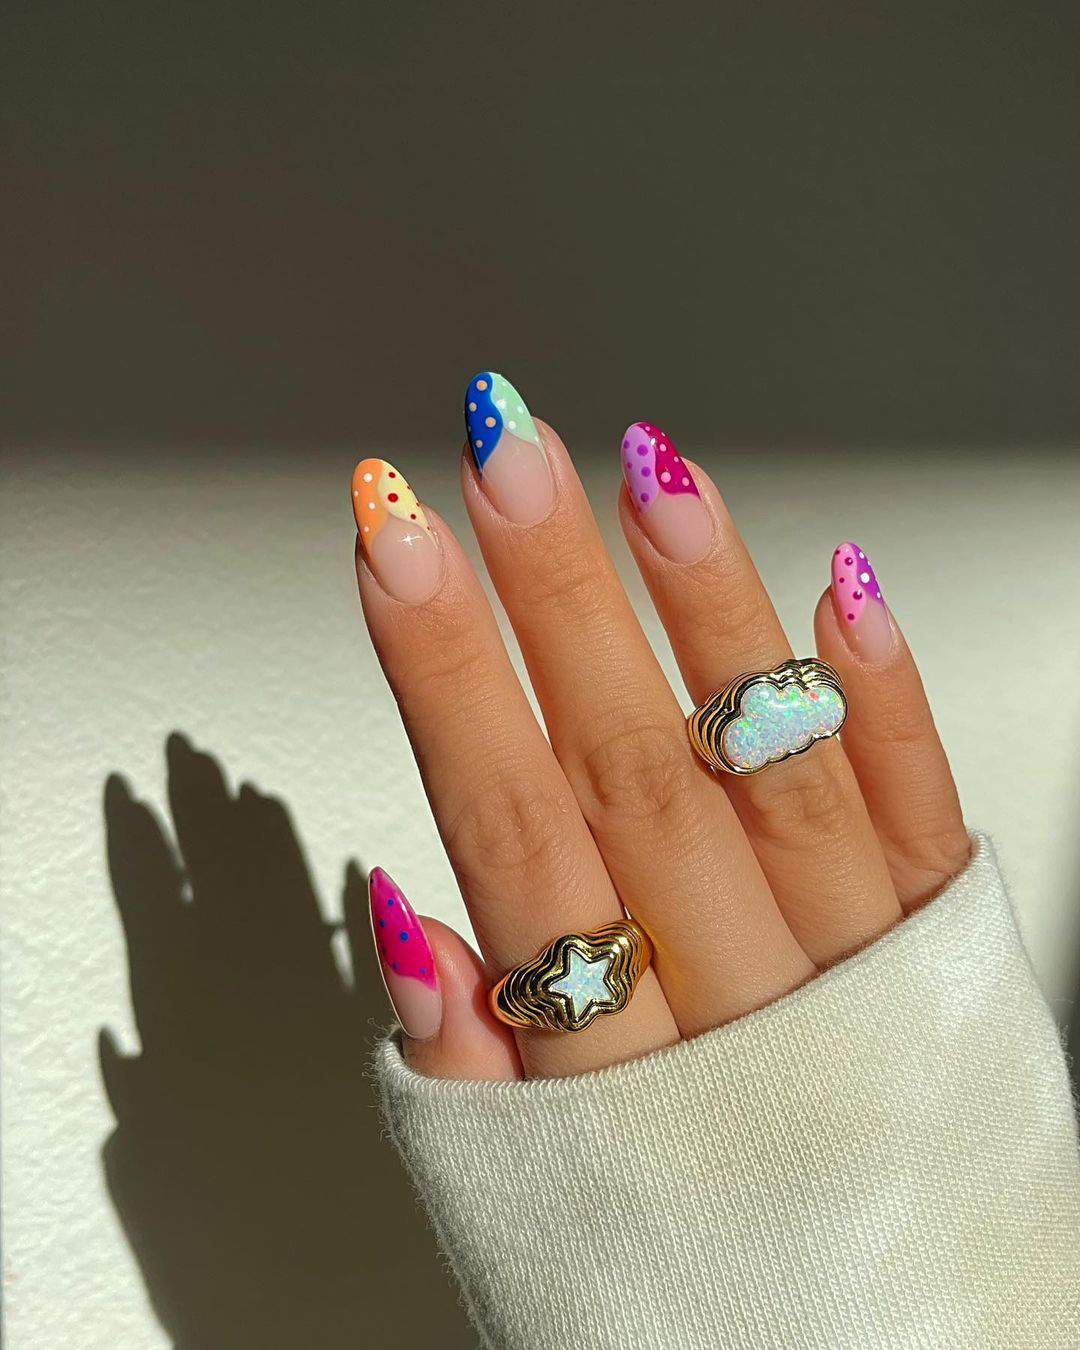 35 Cute Summer Nails To Rock For Women In 2021 images 24